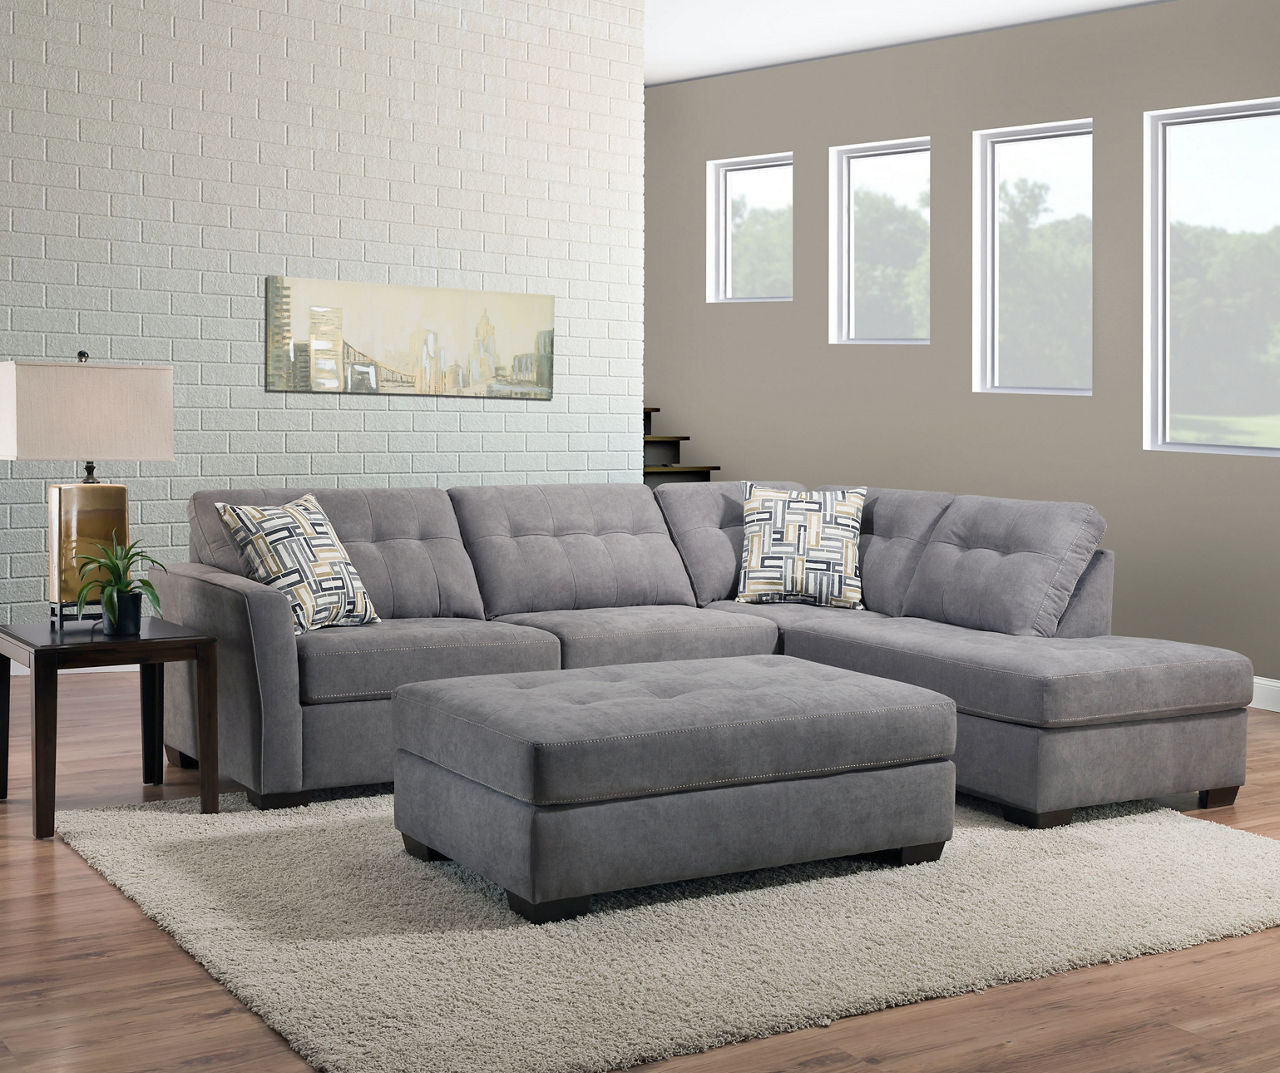 NEW Large Modern Gray Microfiber Living Room Sofa Couch Chaise Sectional Set G3E 